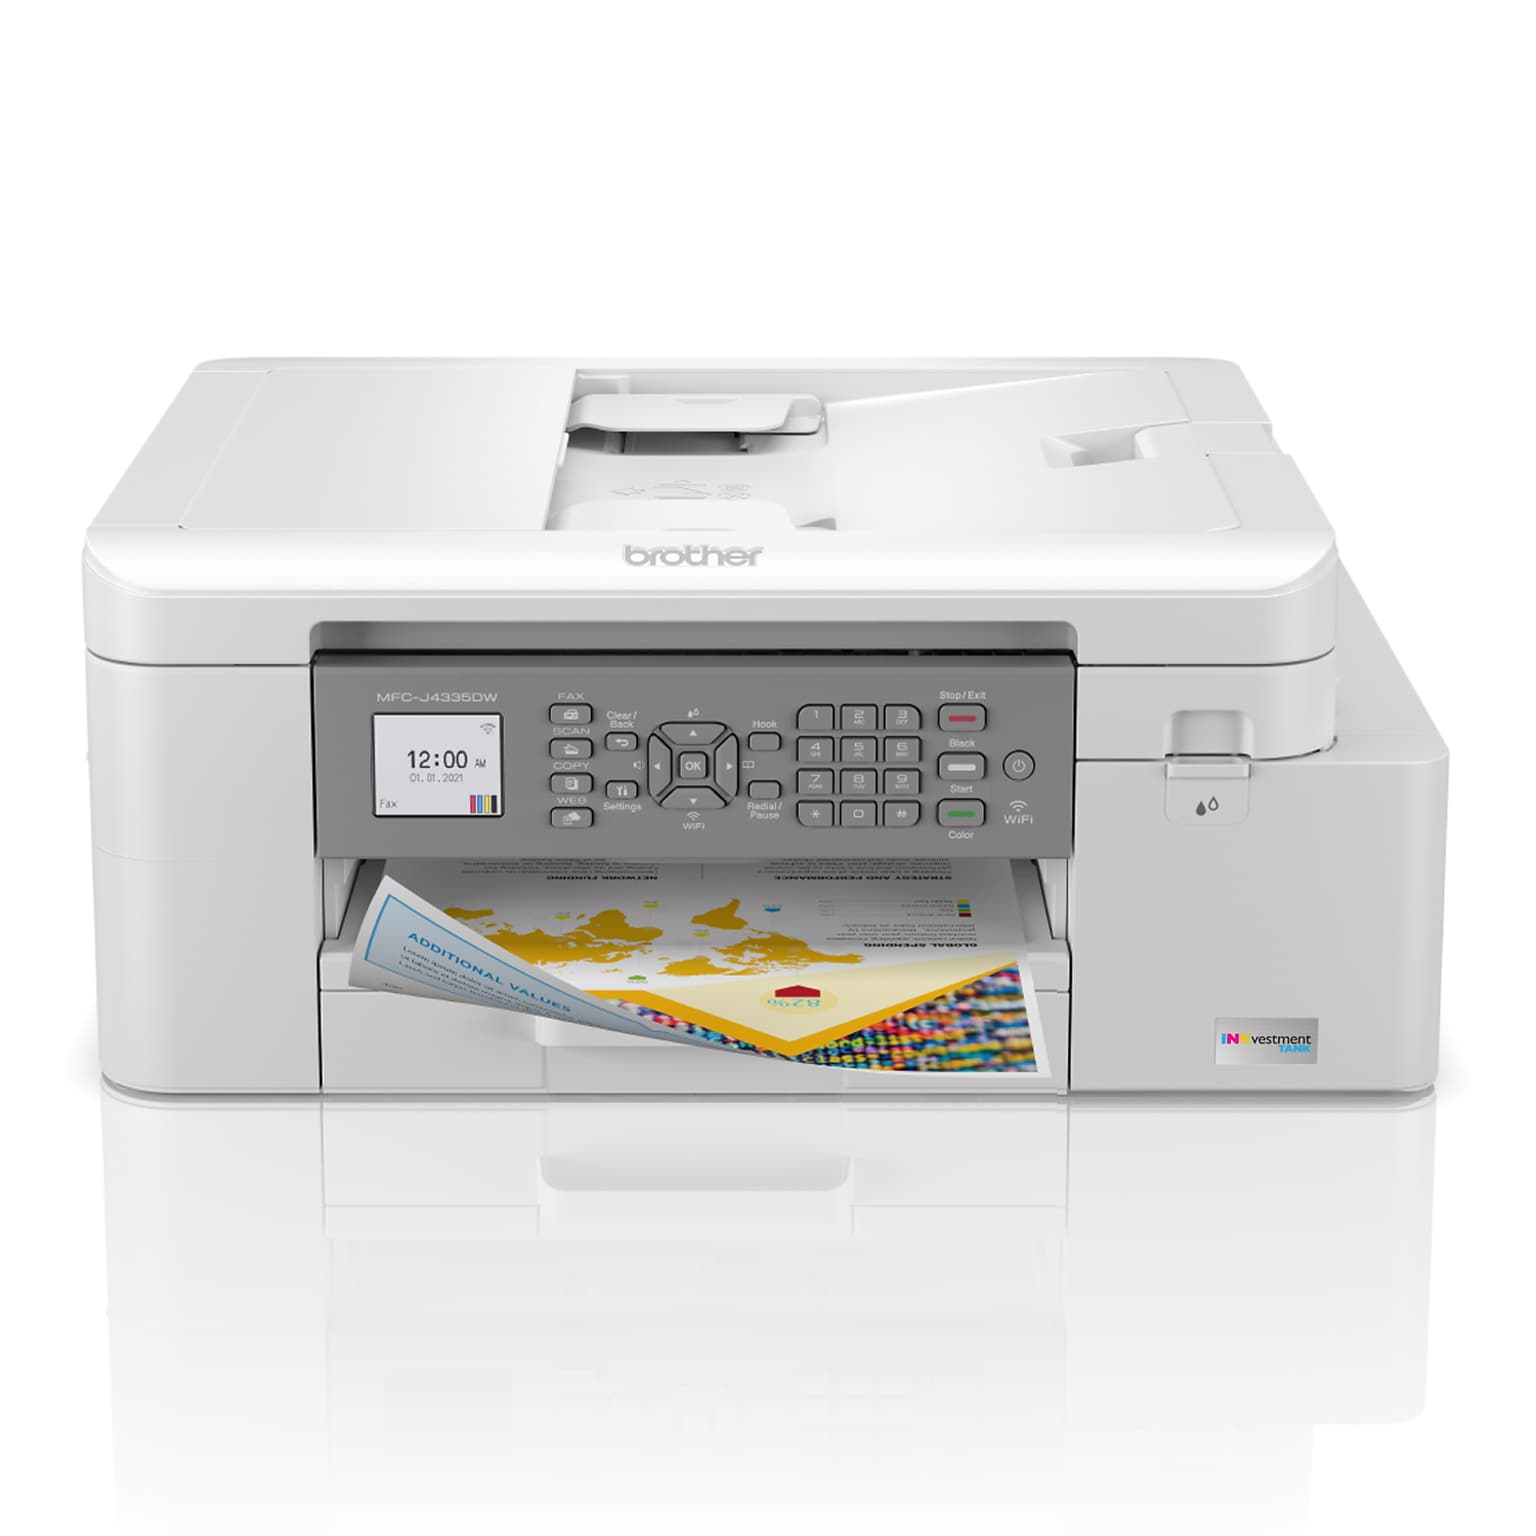 Brother INKvestment Tank MFC-J4335DW Wireless Color All-in-One Inkjet | Quill.com